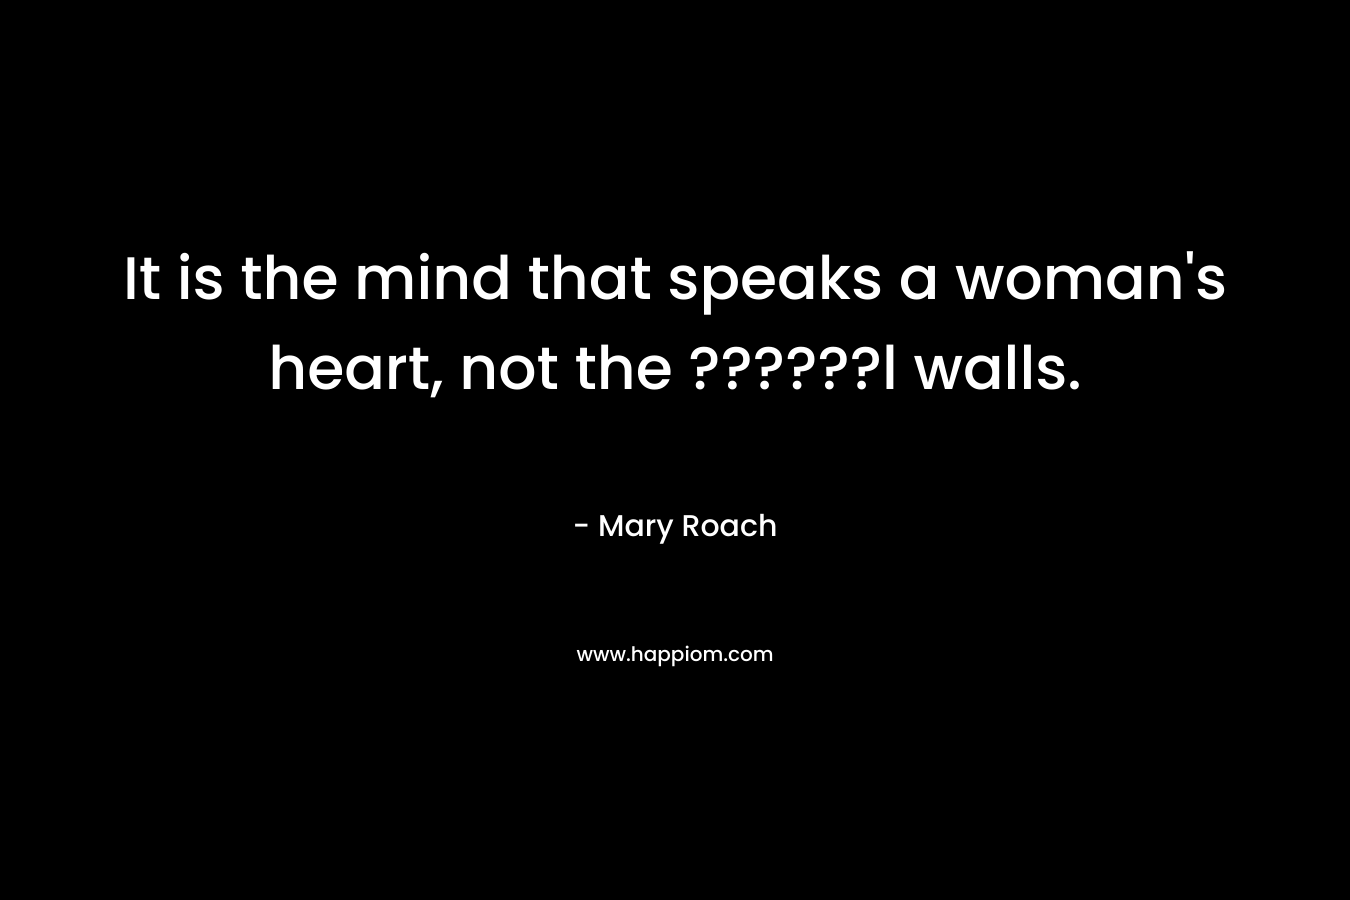 It is the mind that speaks a woman’s heart, not the ??????l walls. – Mary Roach